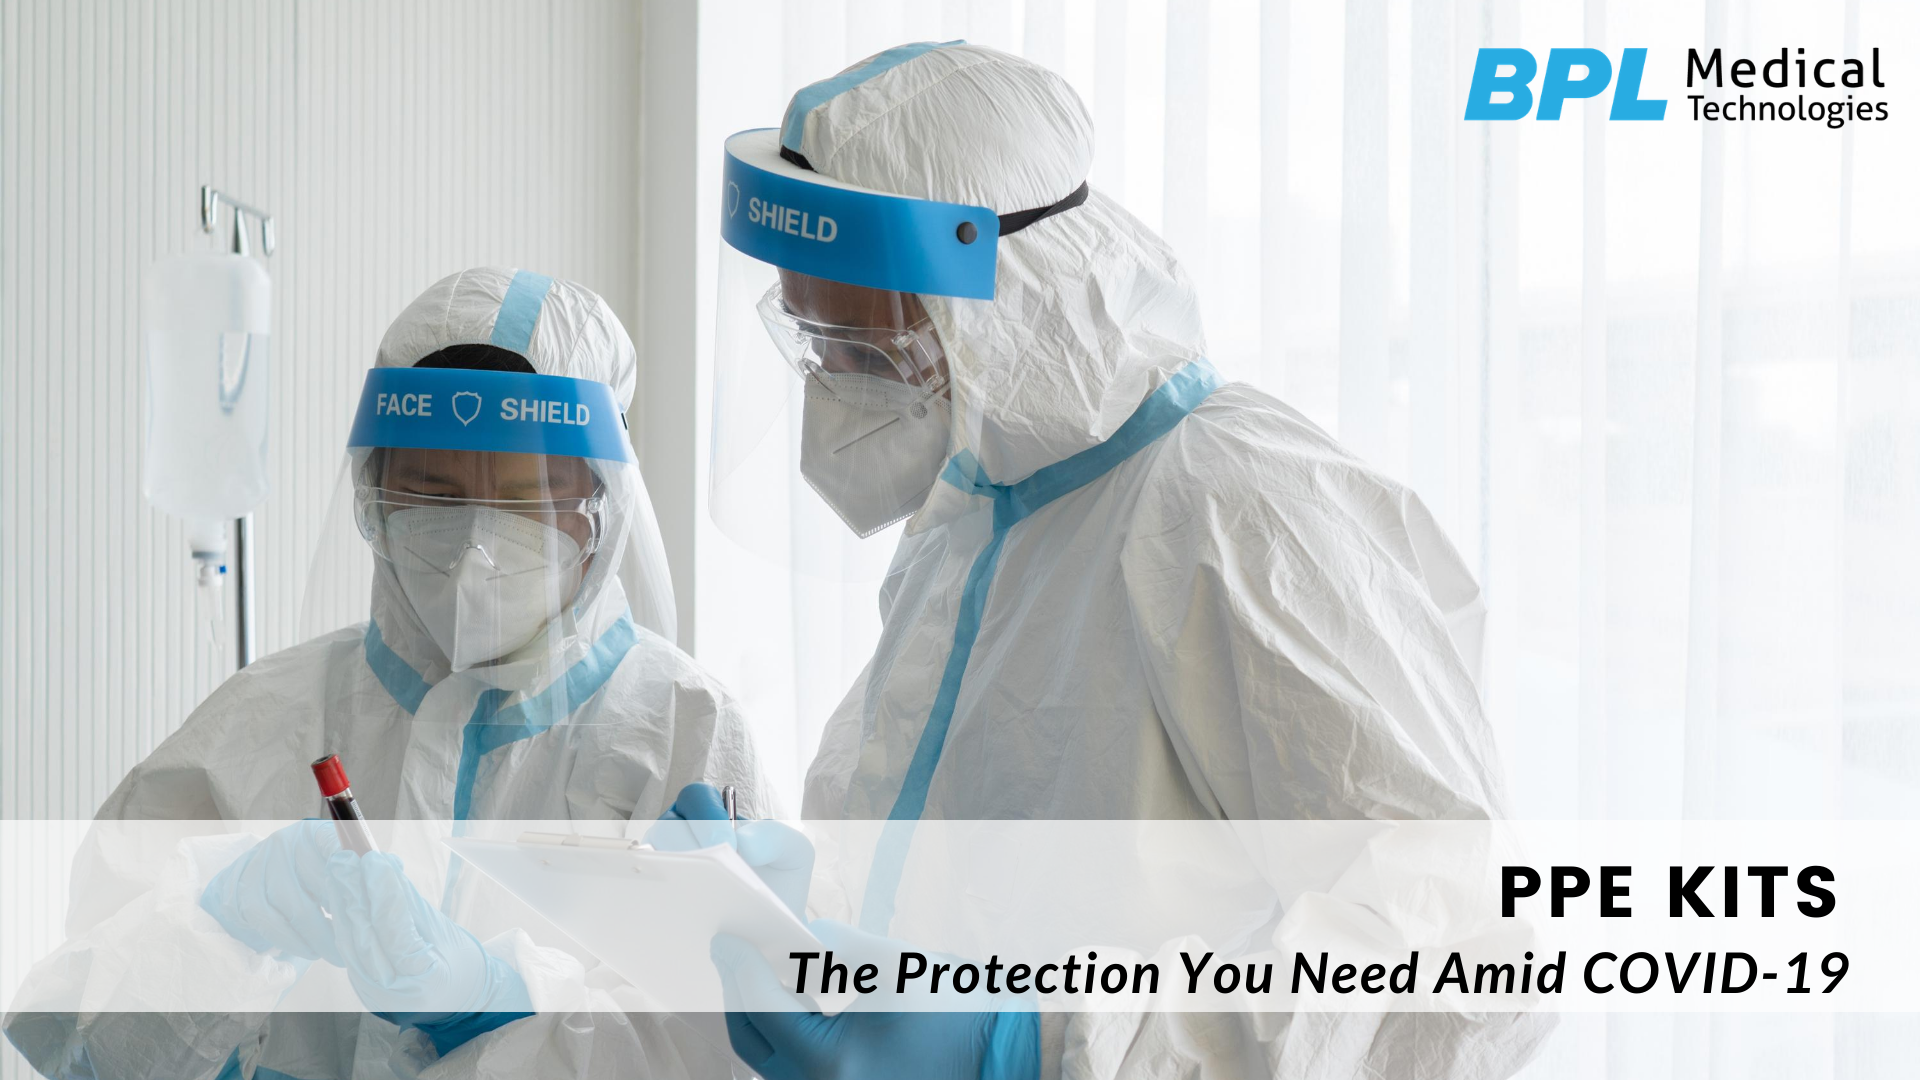 PPE Kit: Types And Uses Of Personal Protective Equipment To Prevent COVID-19